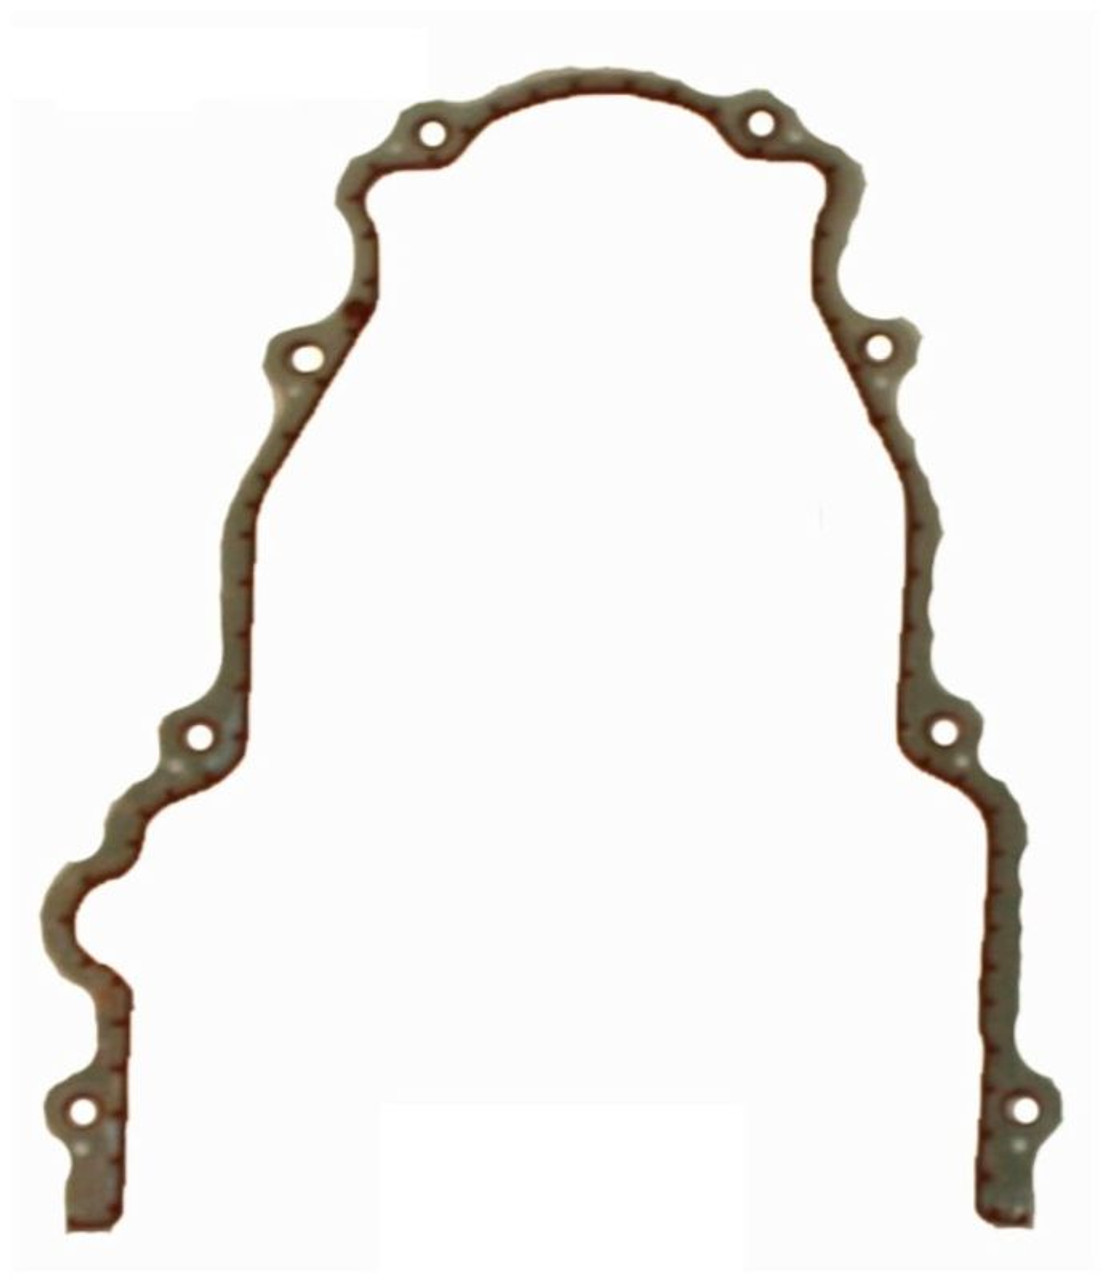 2012 Chevrolet Suburban 2500 6.0L Engine Timing Cover Gasket TCG293-A -787